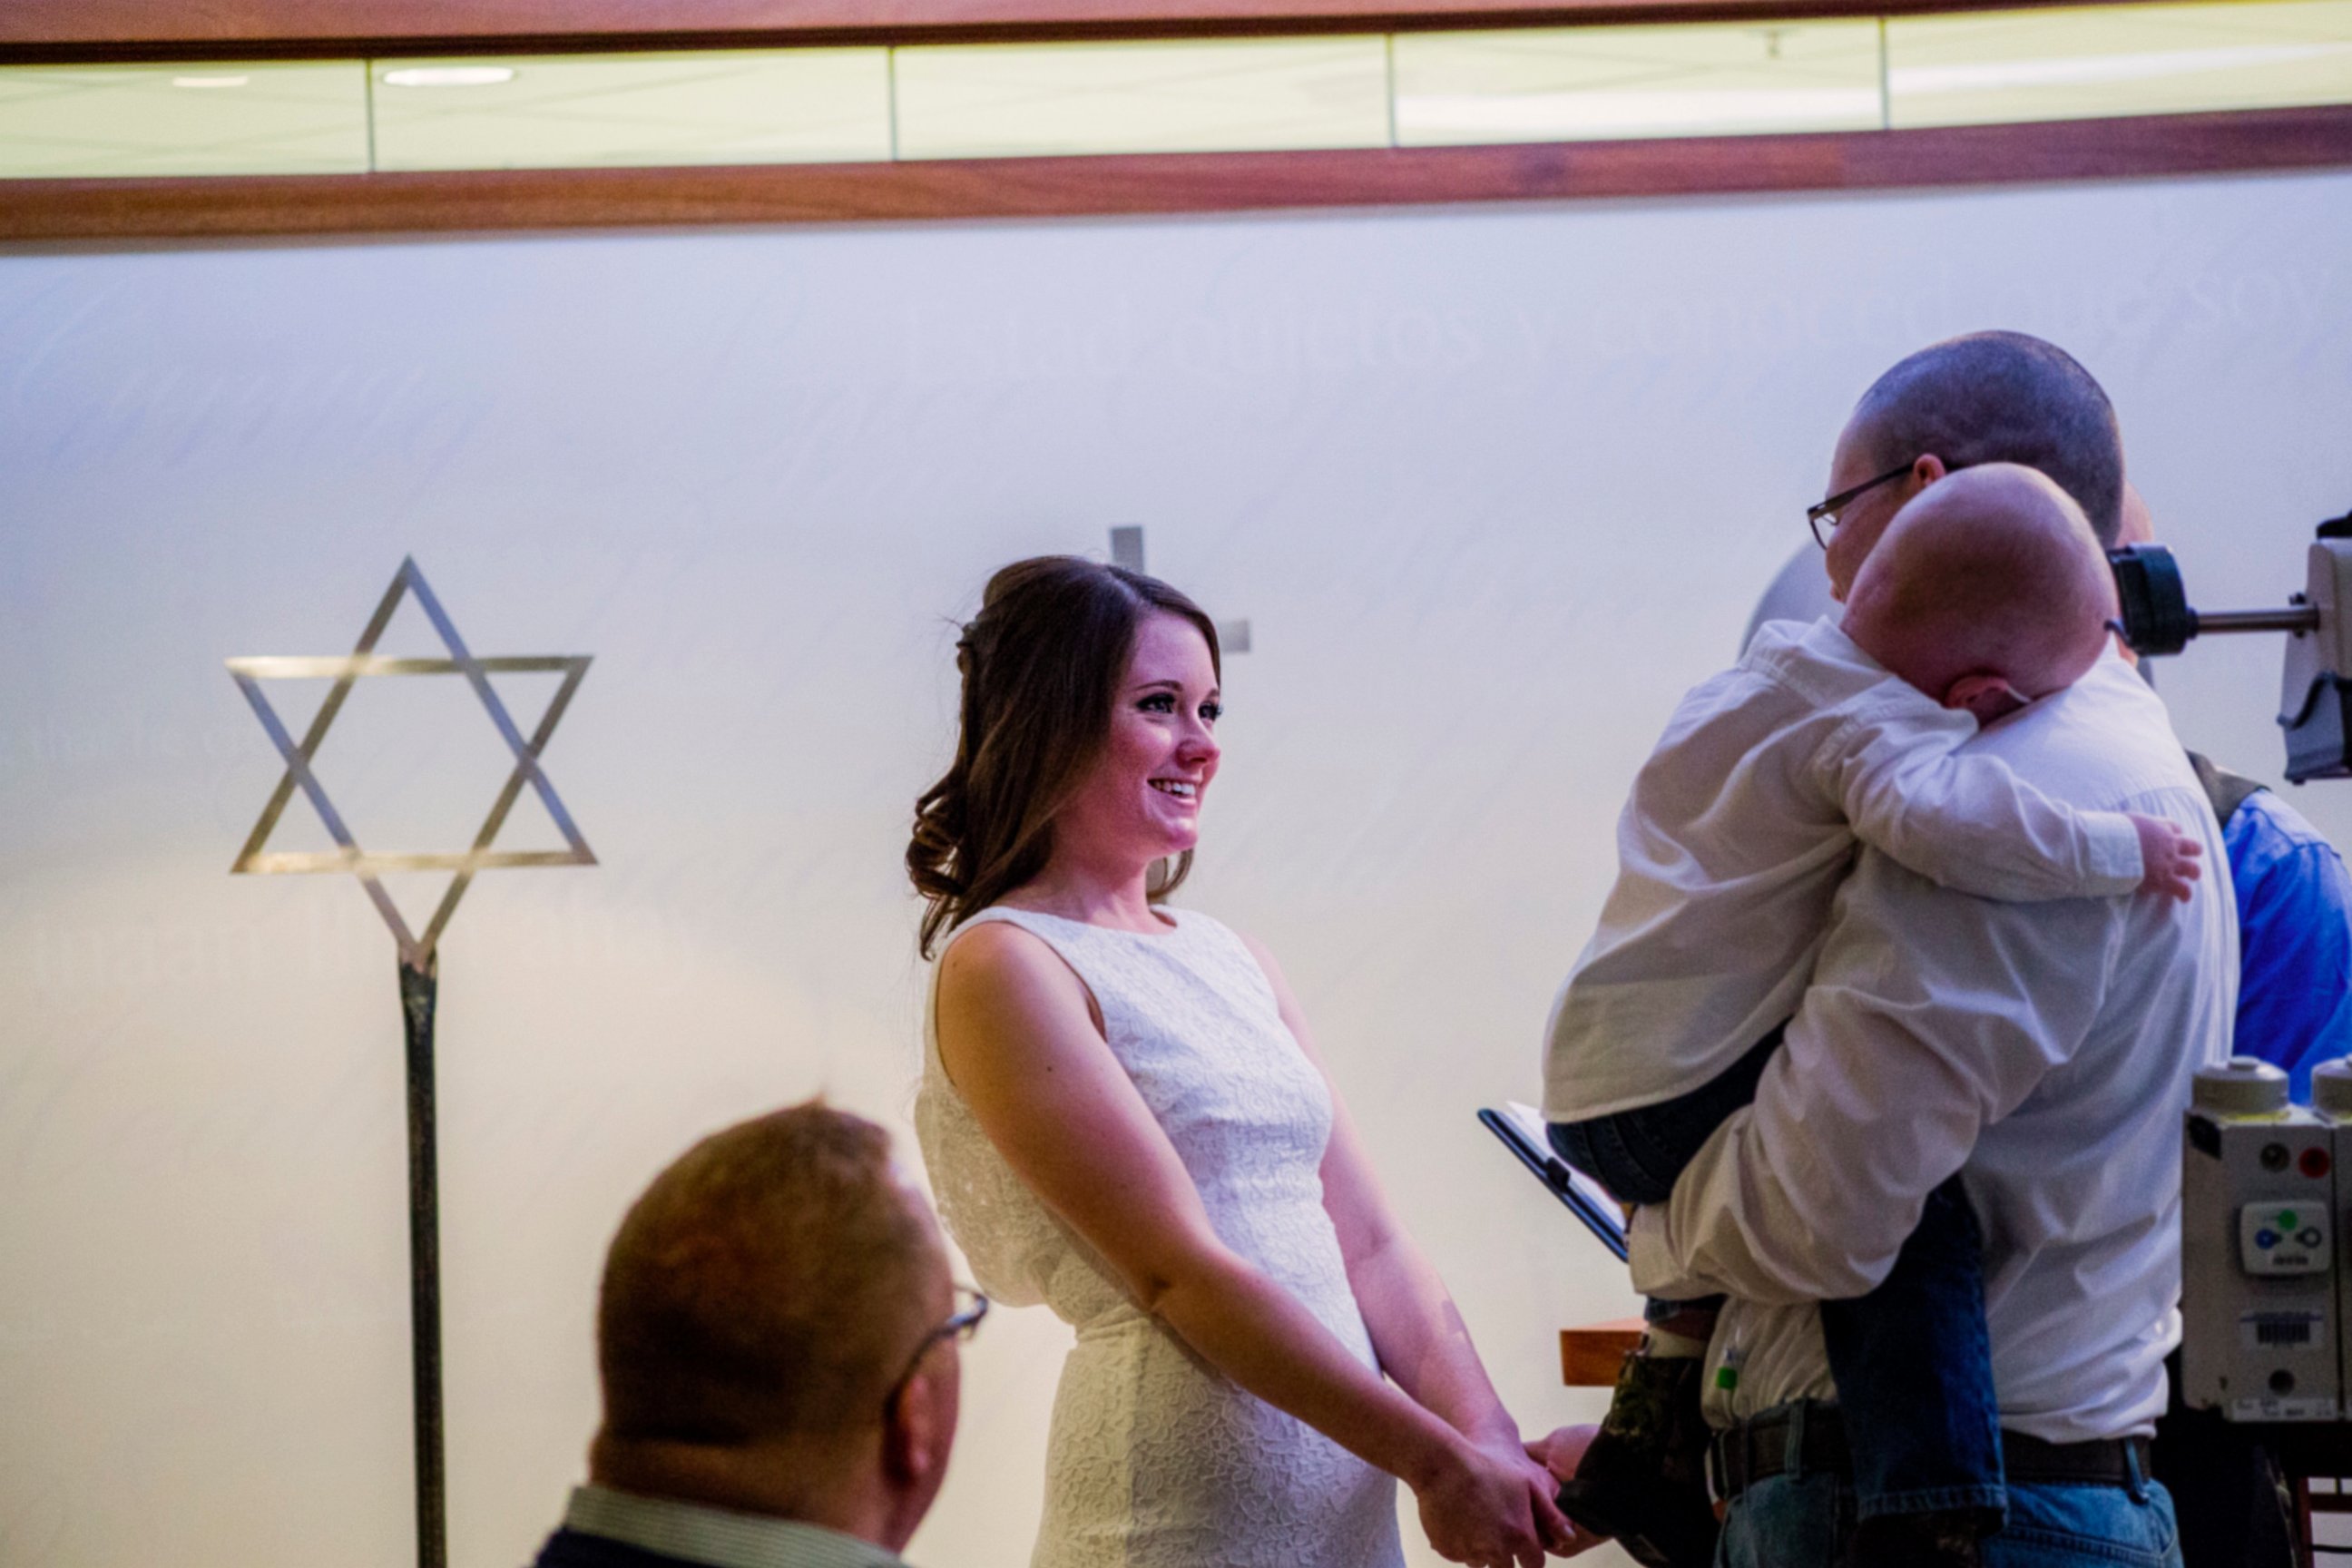 PHOTO: On Jan. 7, Celia Kinzel, 26, and Geff Kinzel, 32, wed in the chapel of Nationwide Children's Hospital in Columbus, Ohio where their son Logan, 2, is a patient. 